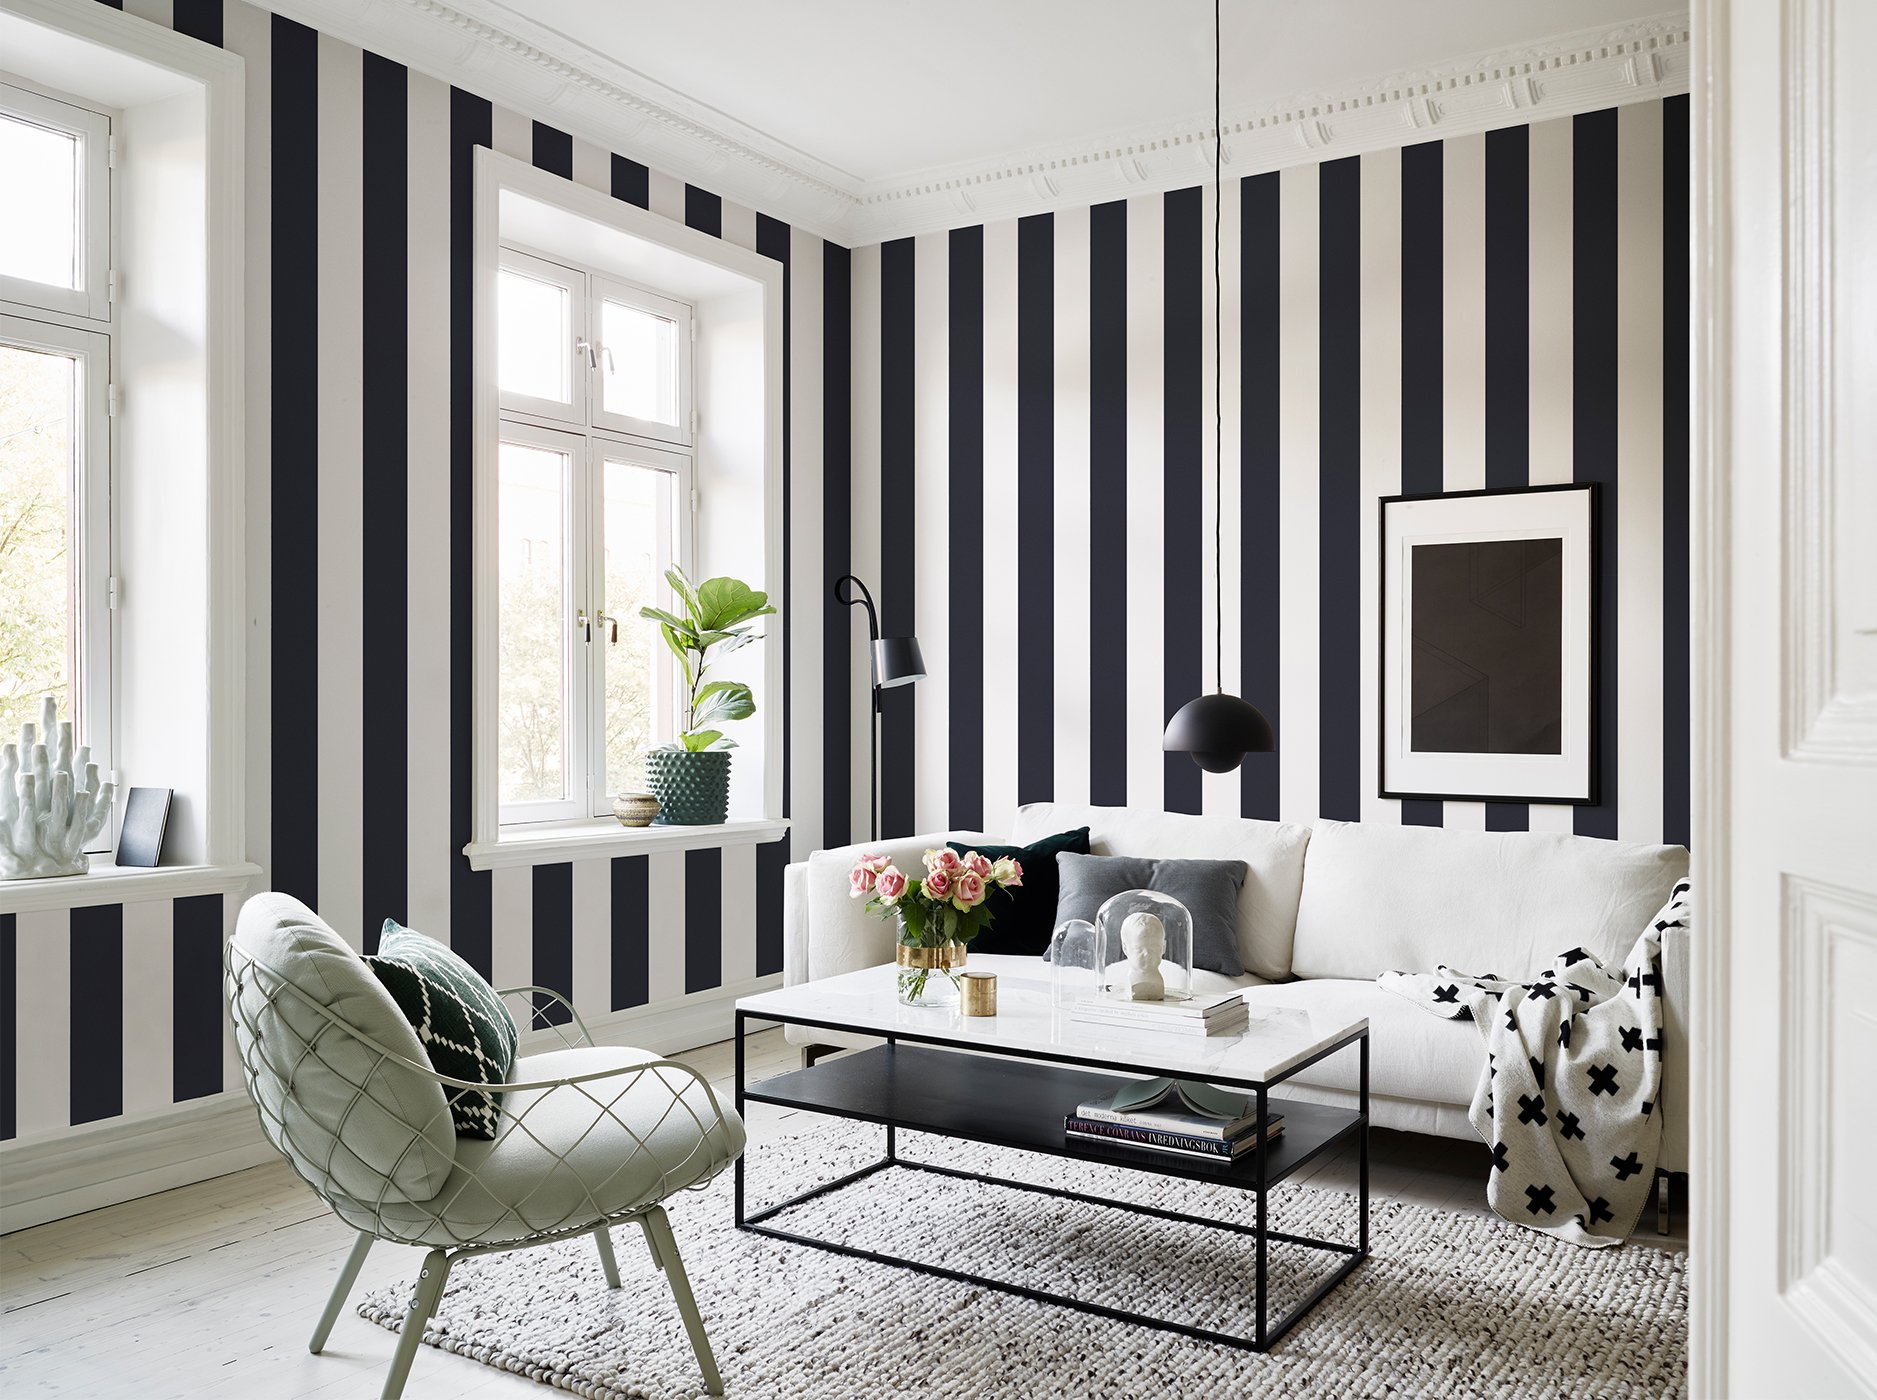 wallpaper in black and white stripes